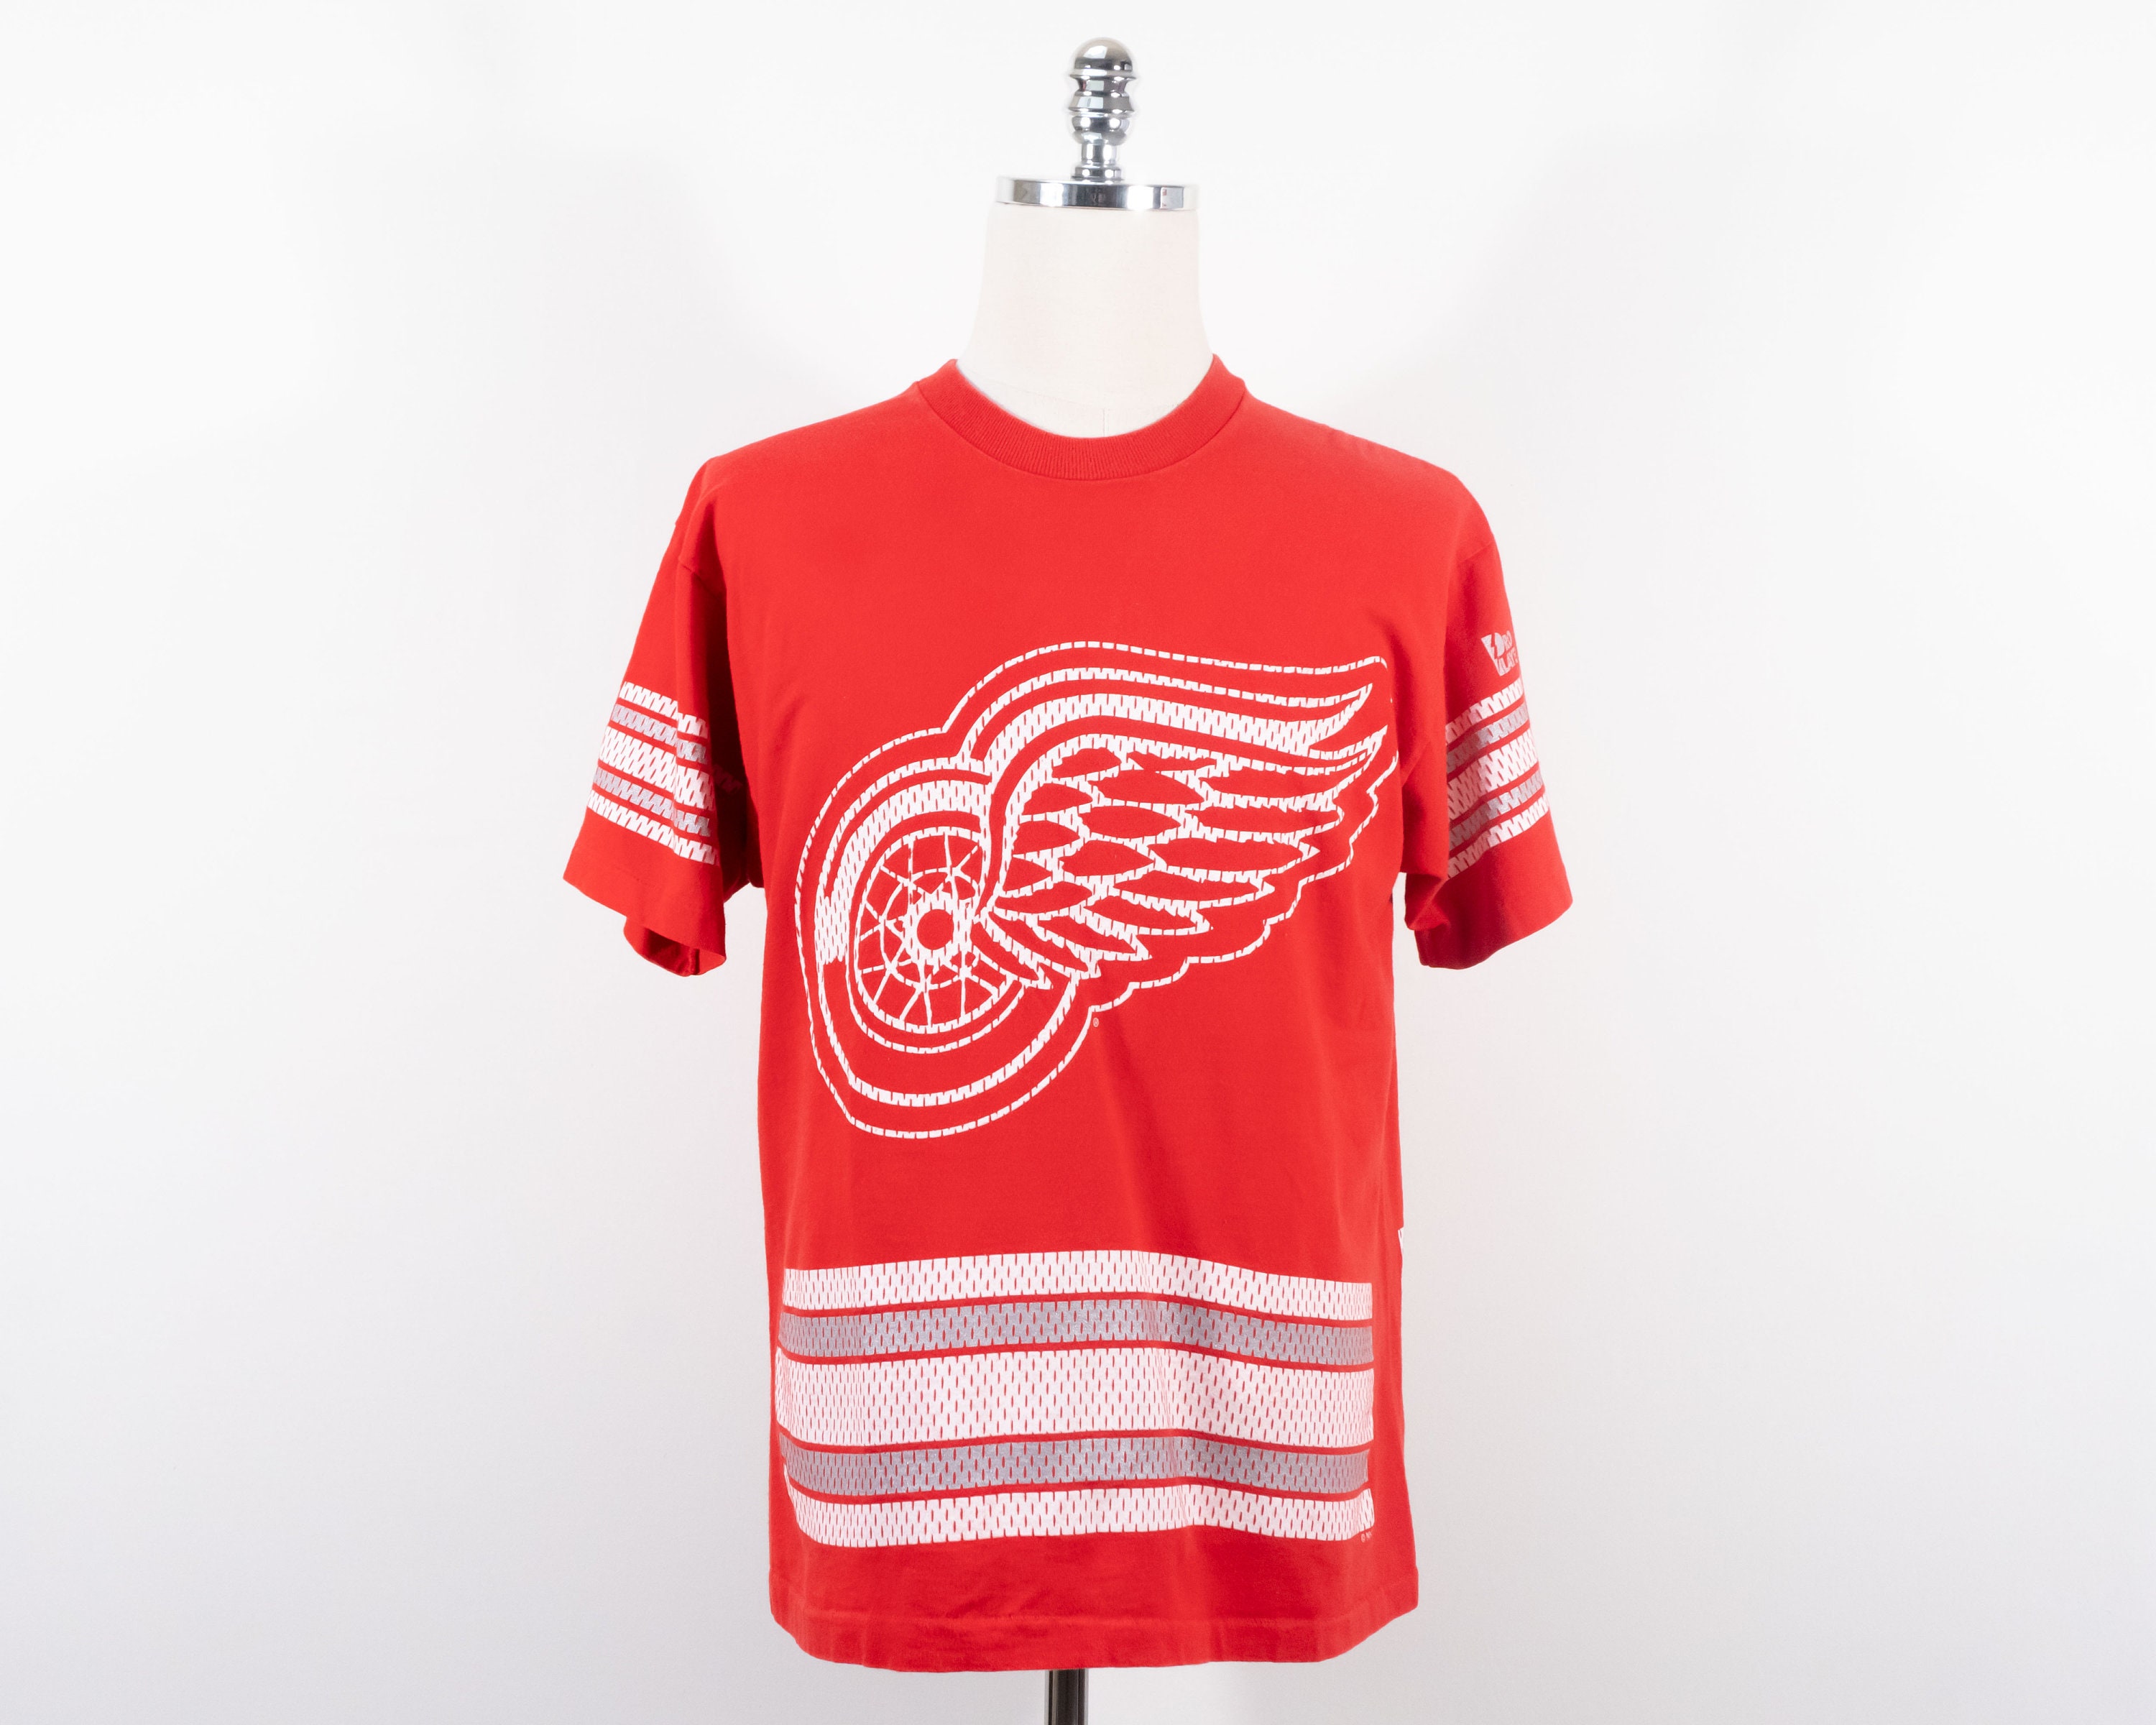 Detroit Red Wings 1972-73 jersey artwork, This is a highly …